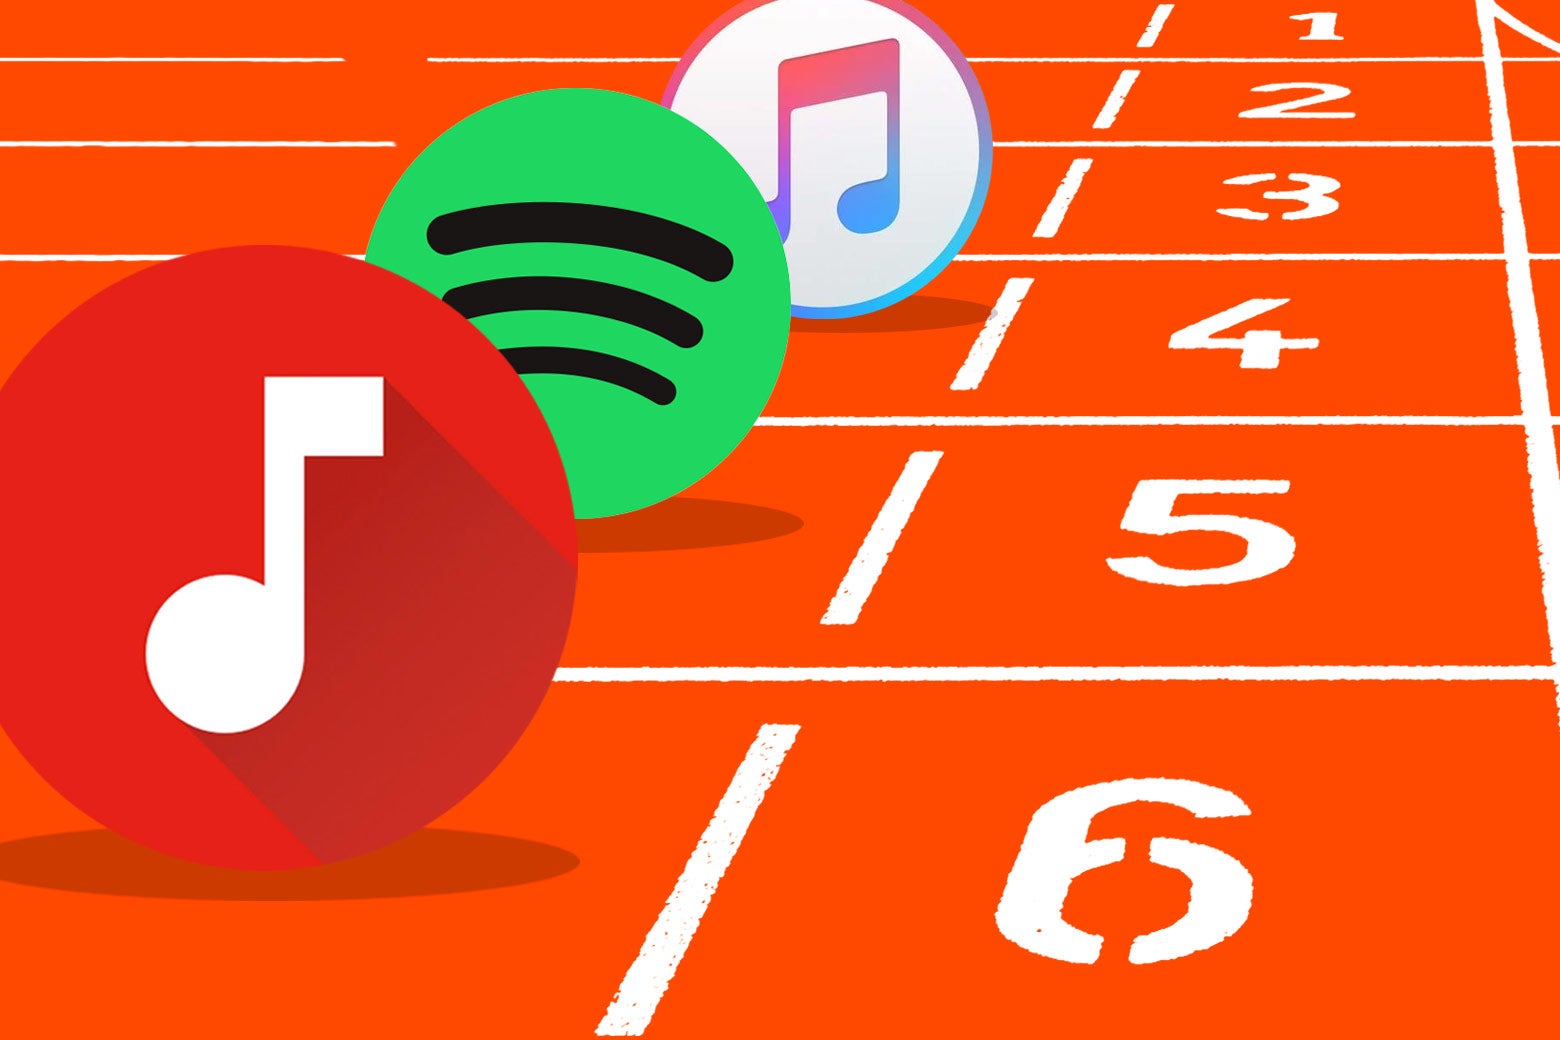 Apple Music, Spotify, and YouTube Music logos at the starting line on a track.